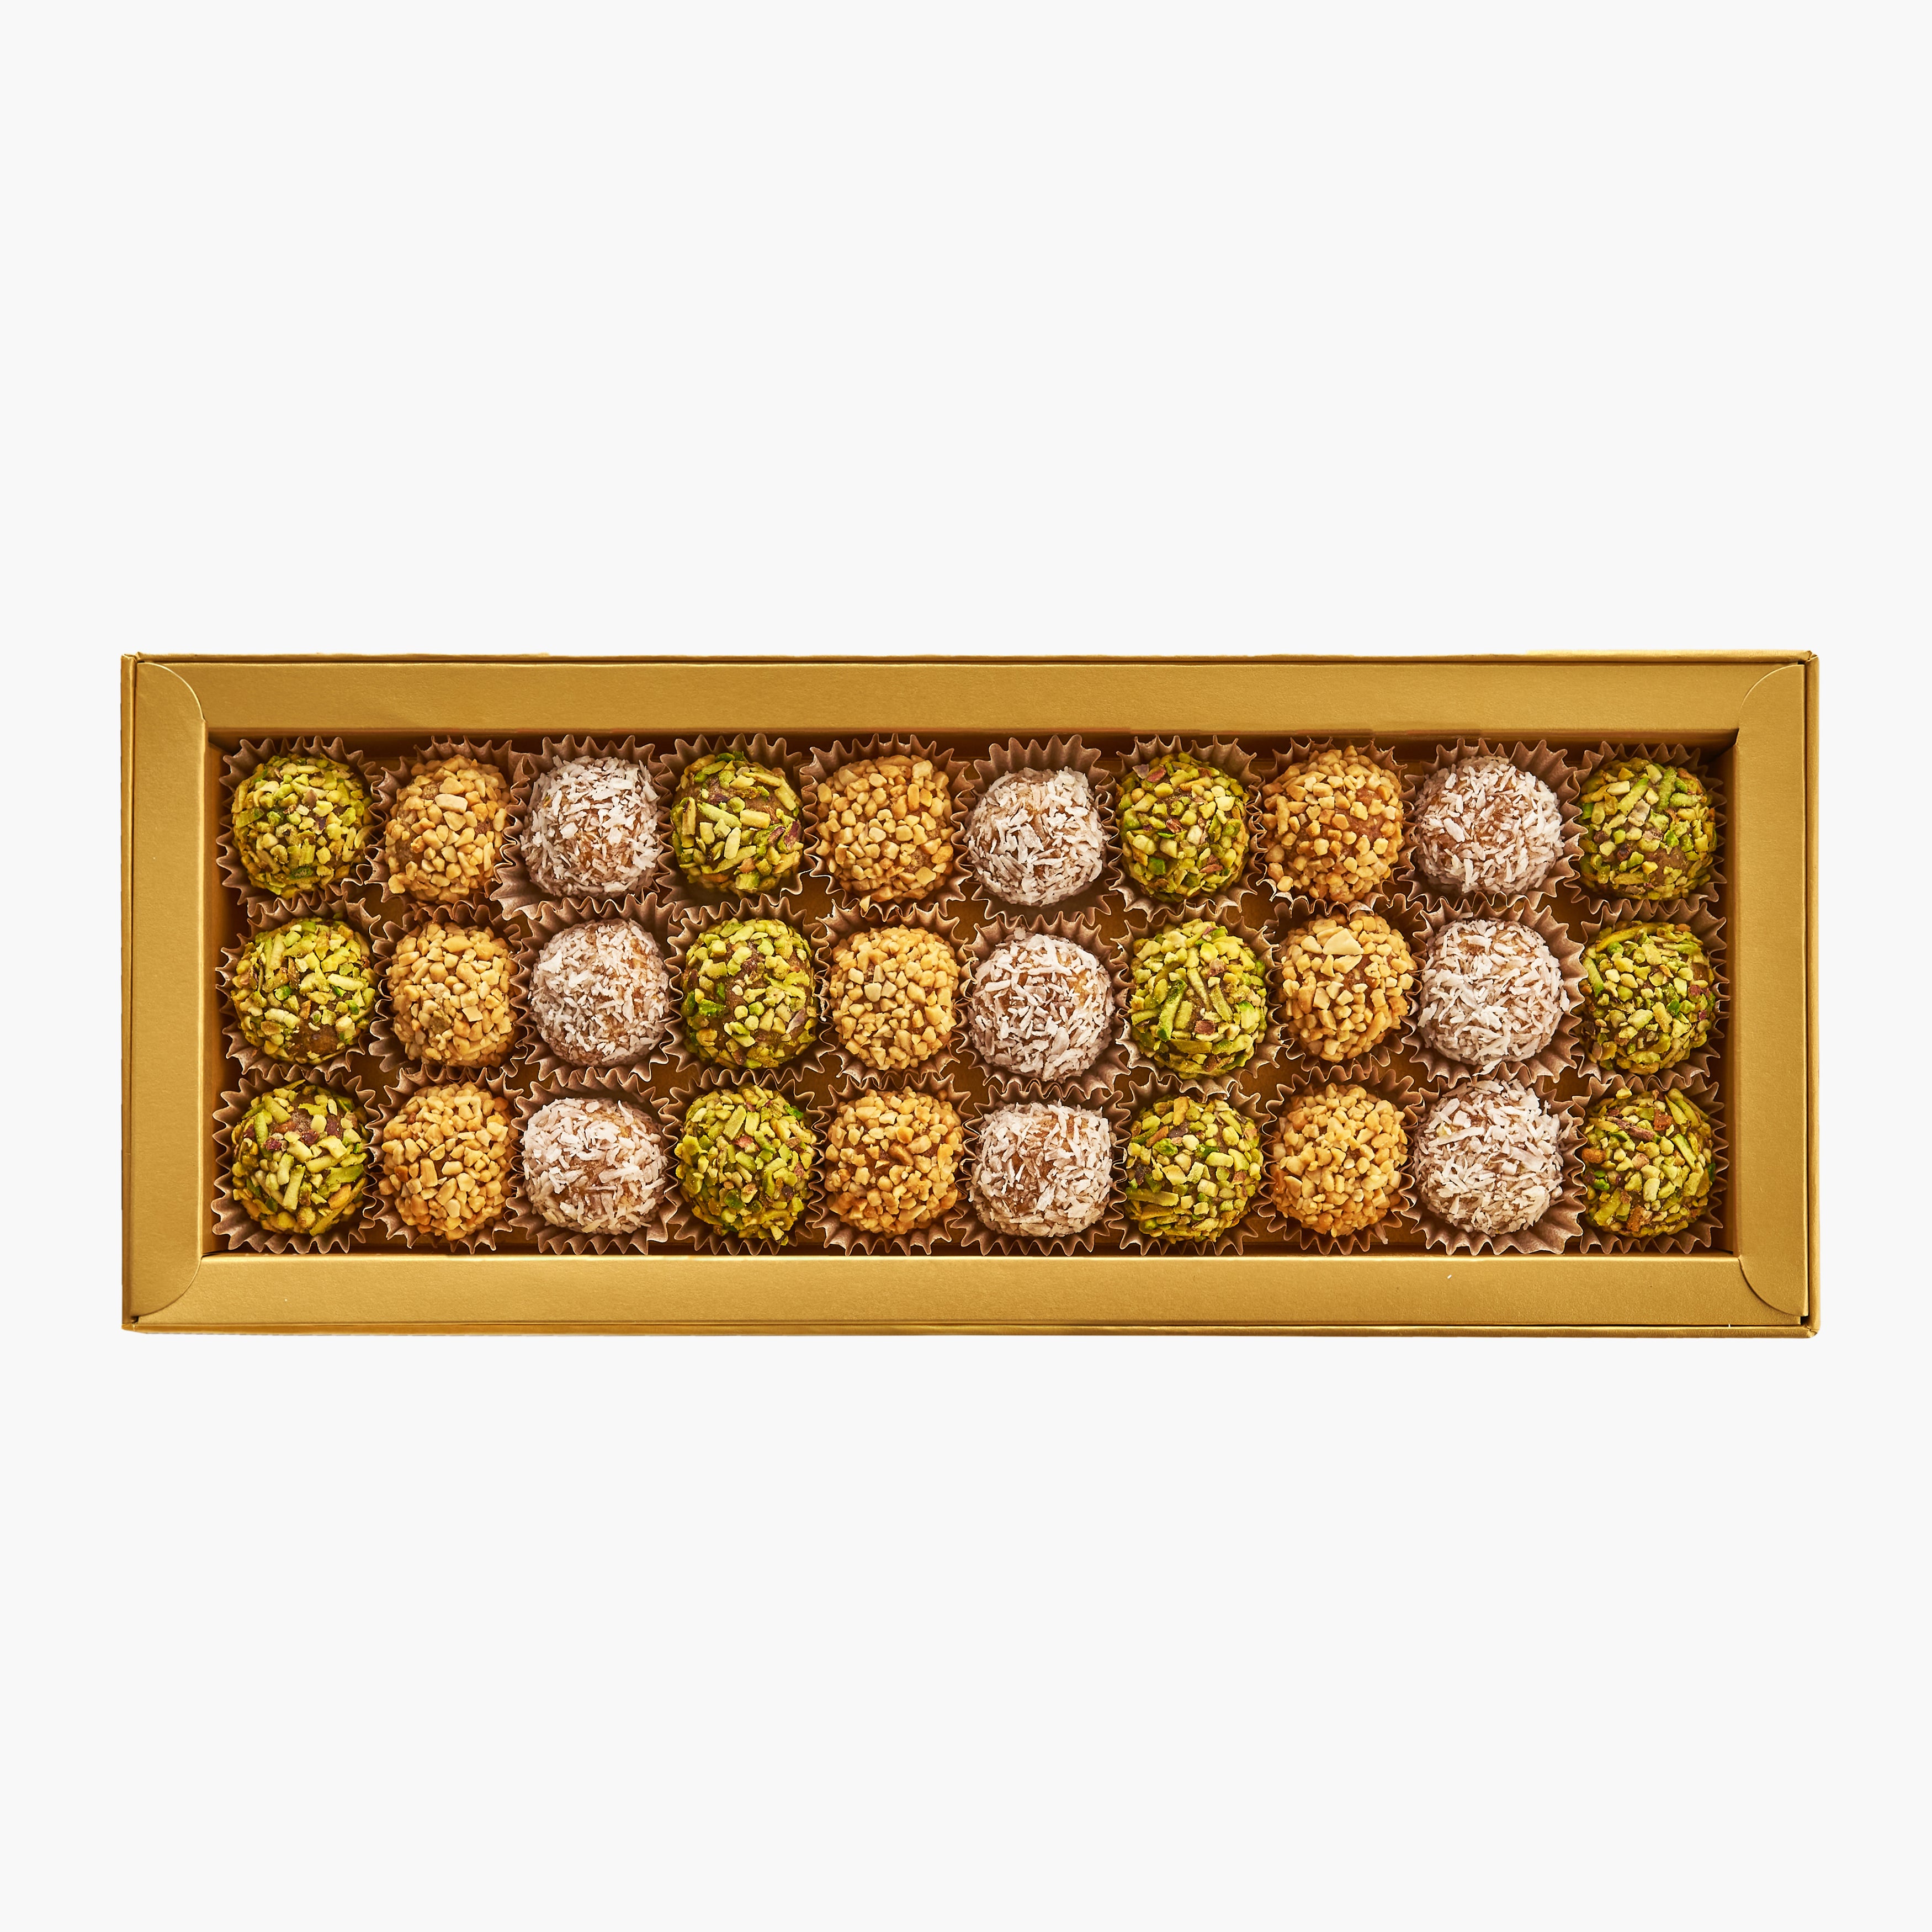 A large box of Assorted Date bites